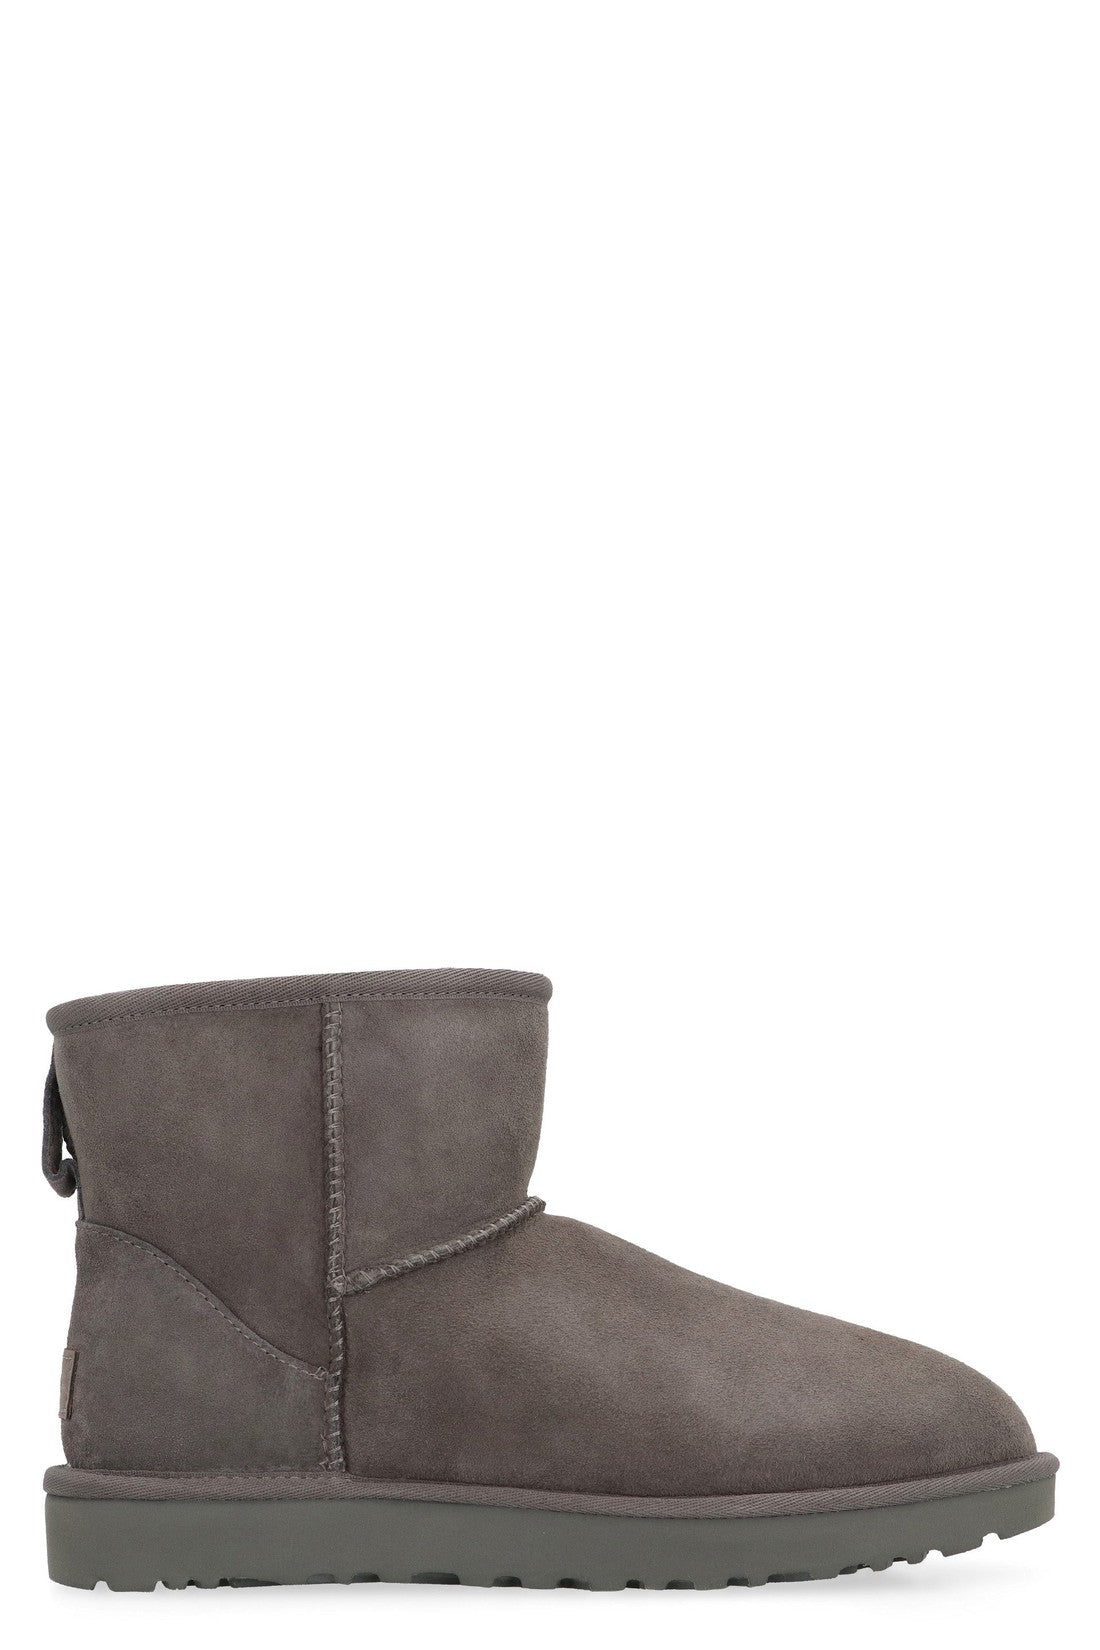 UGG-OUTLET-SALE-Classic Mini II ankle boots-ARCHIVIST